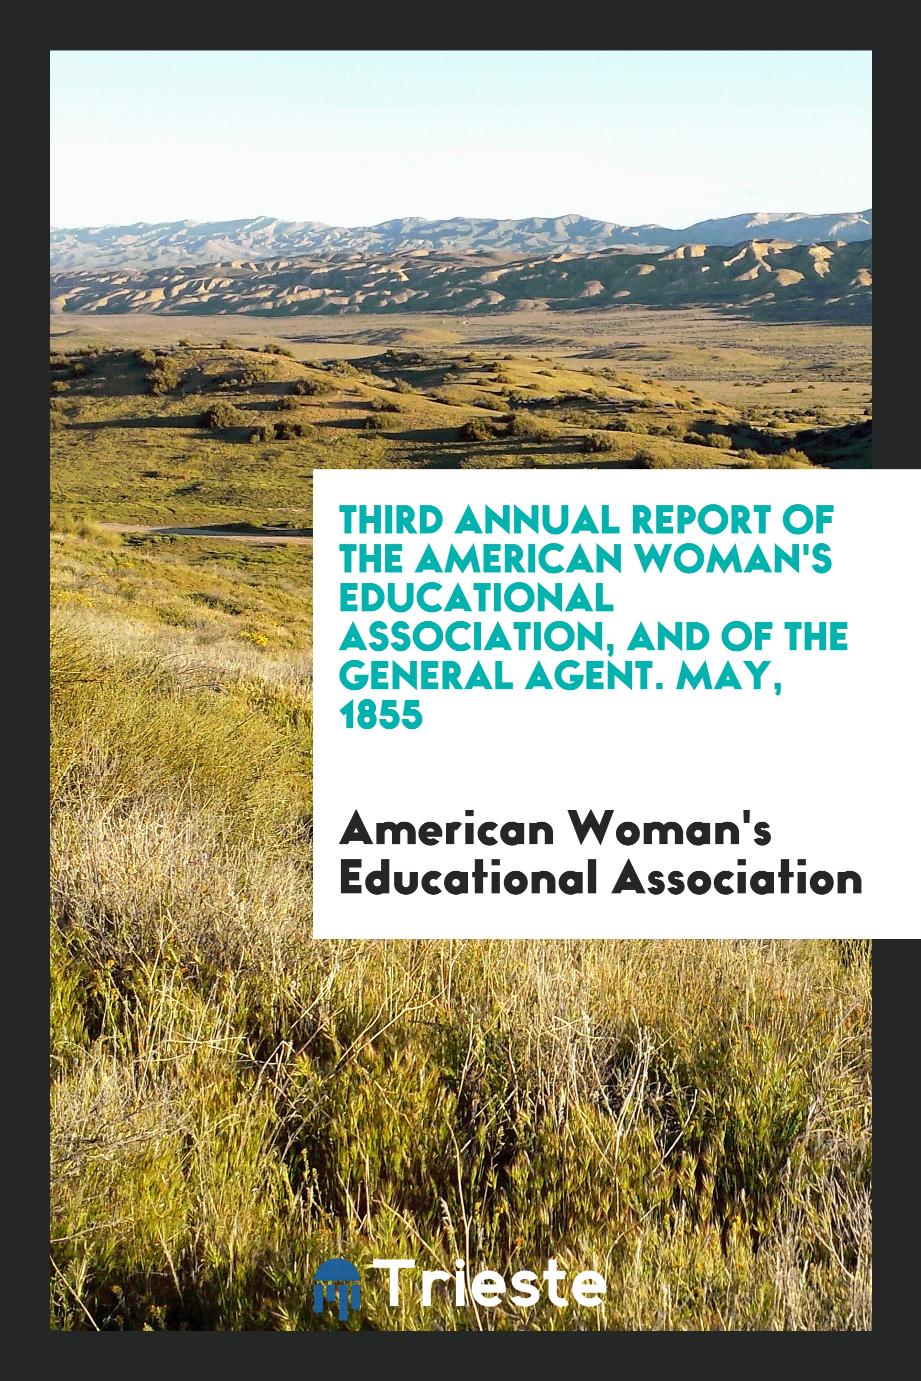 Third Annual Report of the American Woman's Educational Association, and of the general agent. May, 1855